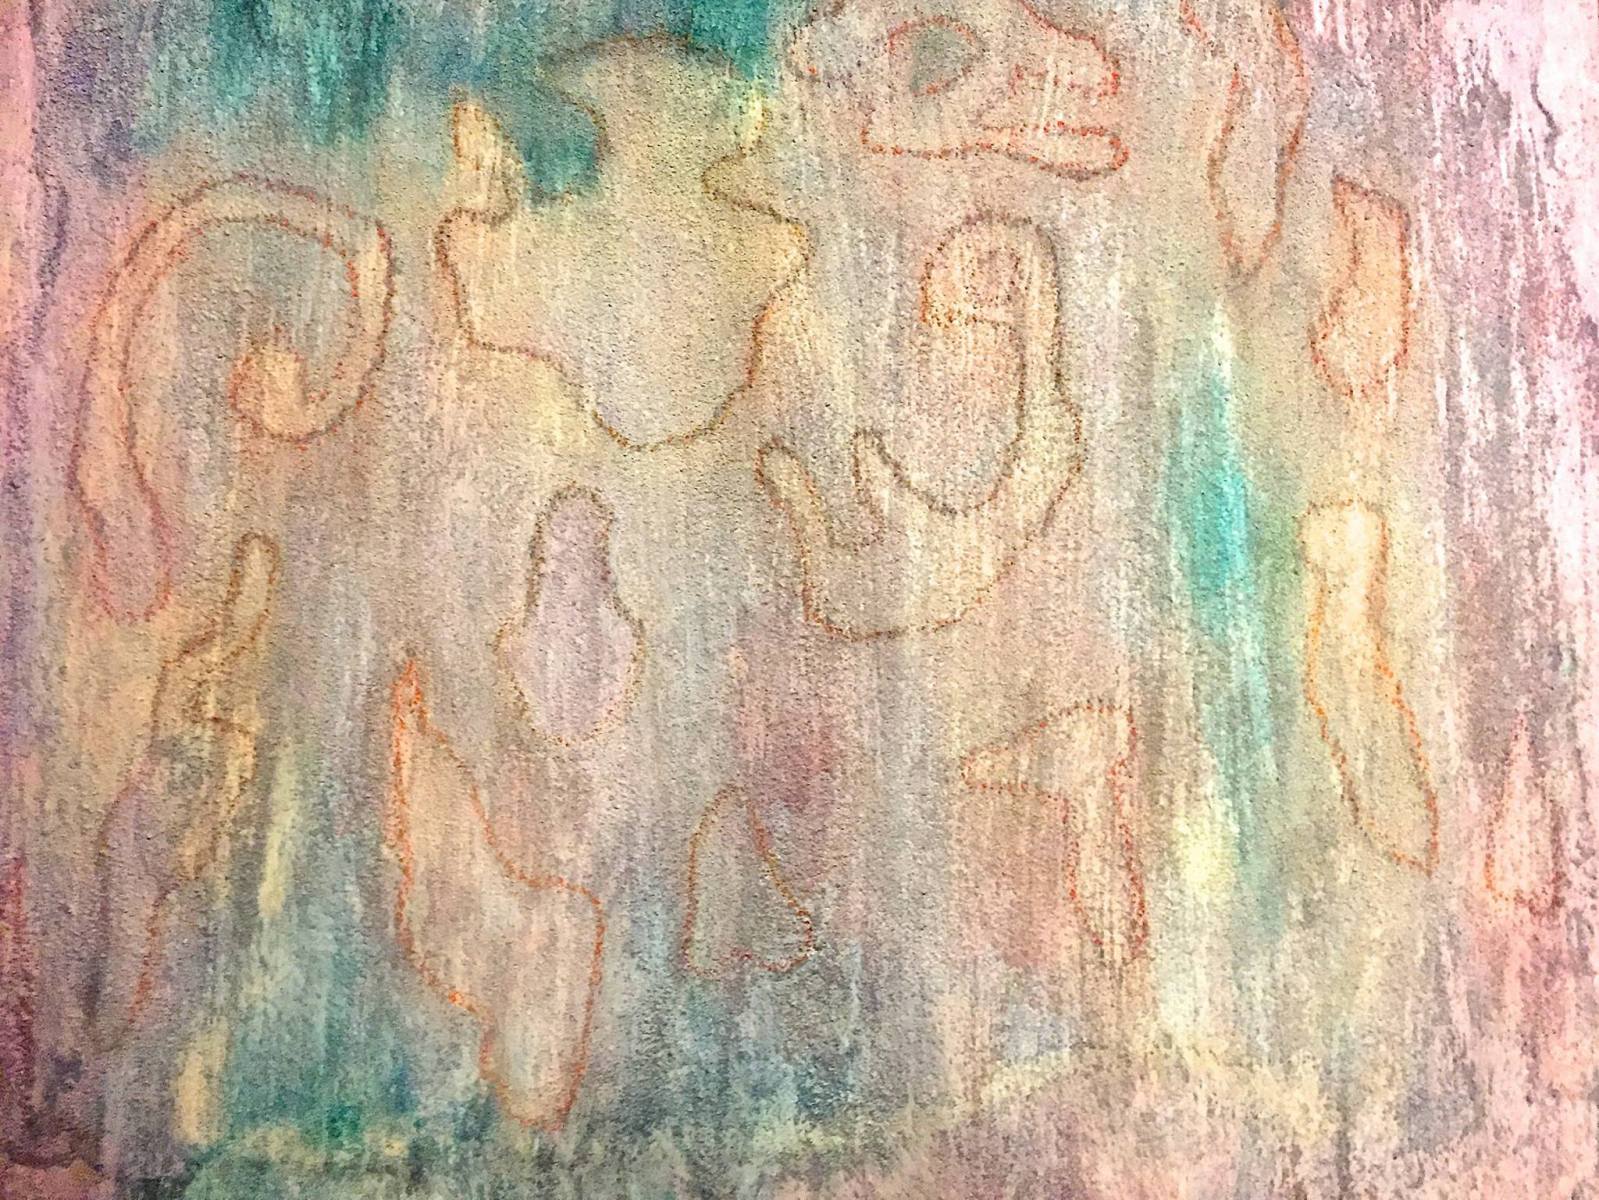 Happy Spirits (acrlic, inlk and sand on canvas on canvas)